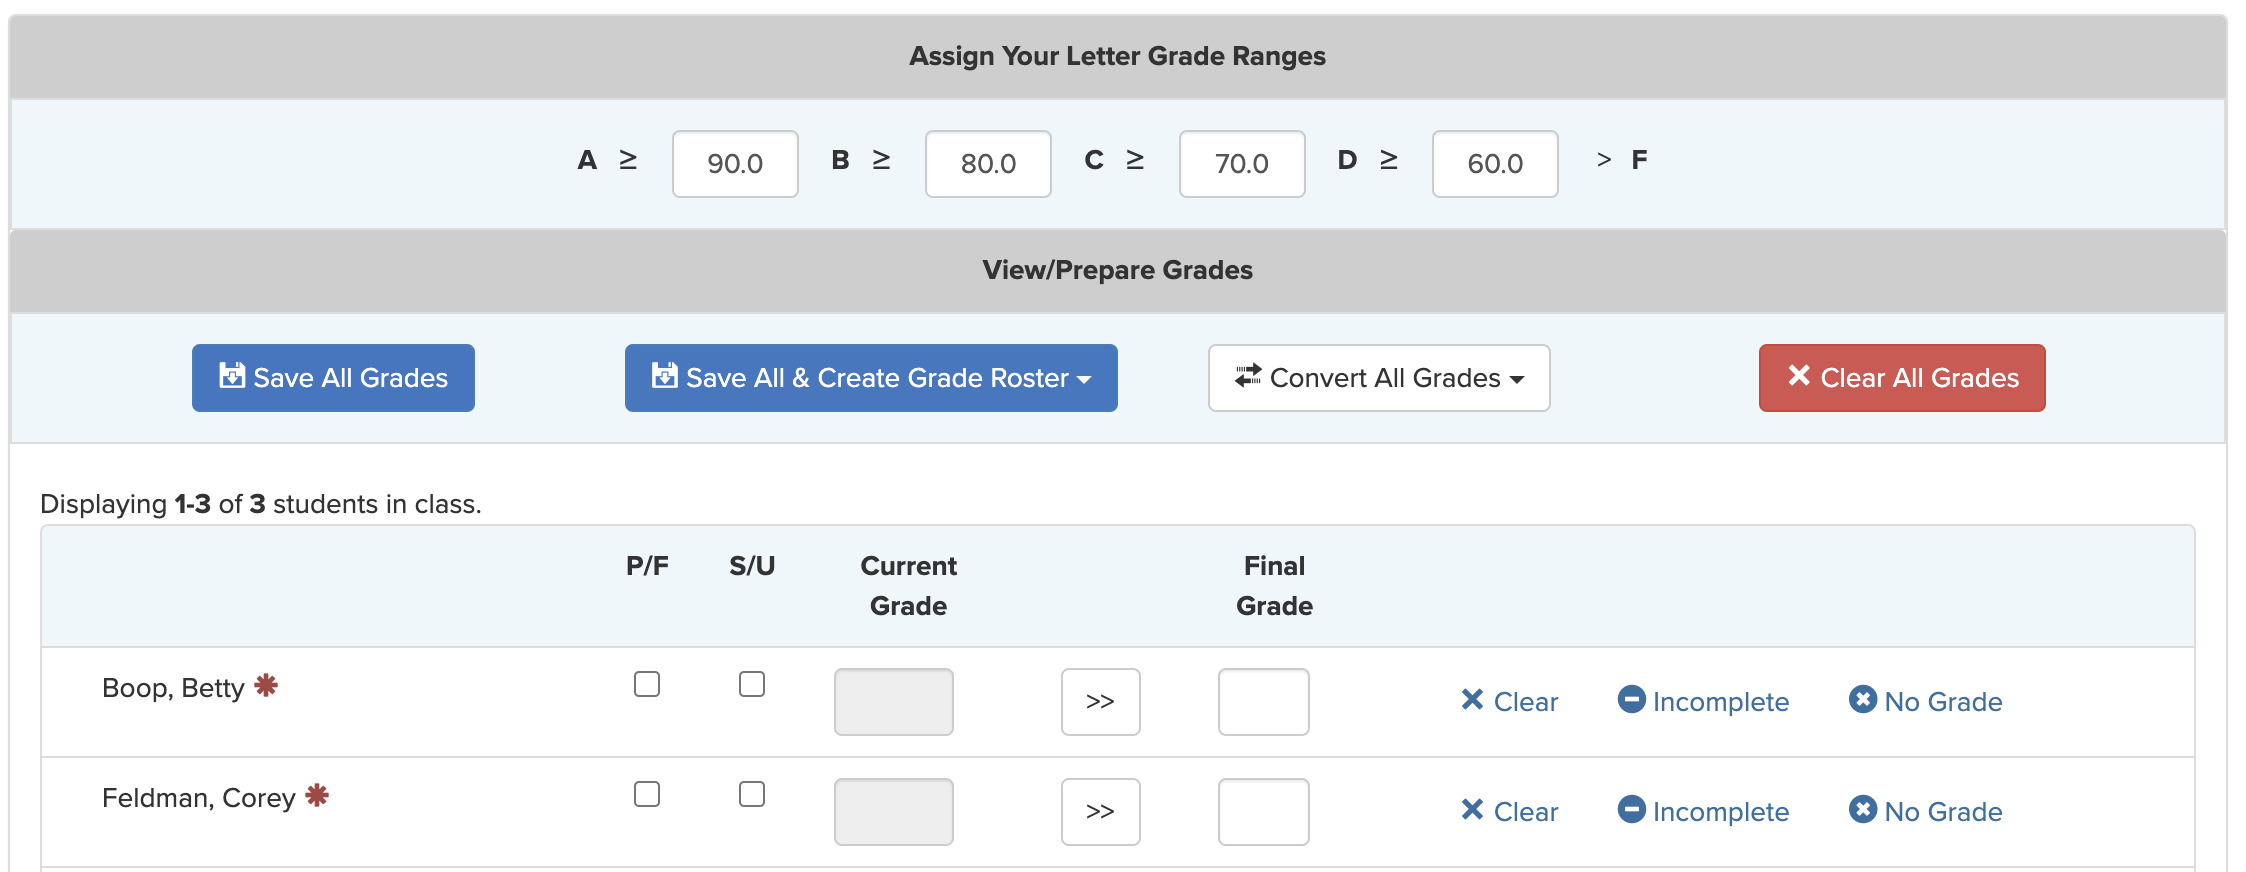 Overview of different options within the page for viewing current and final grades